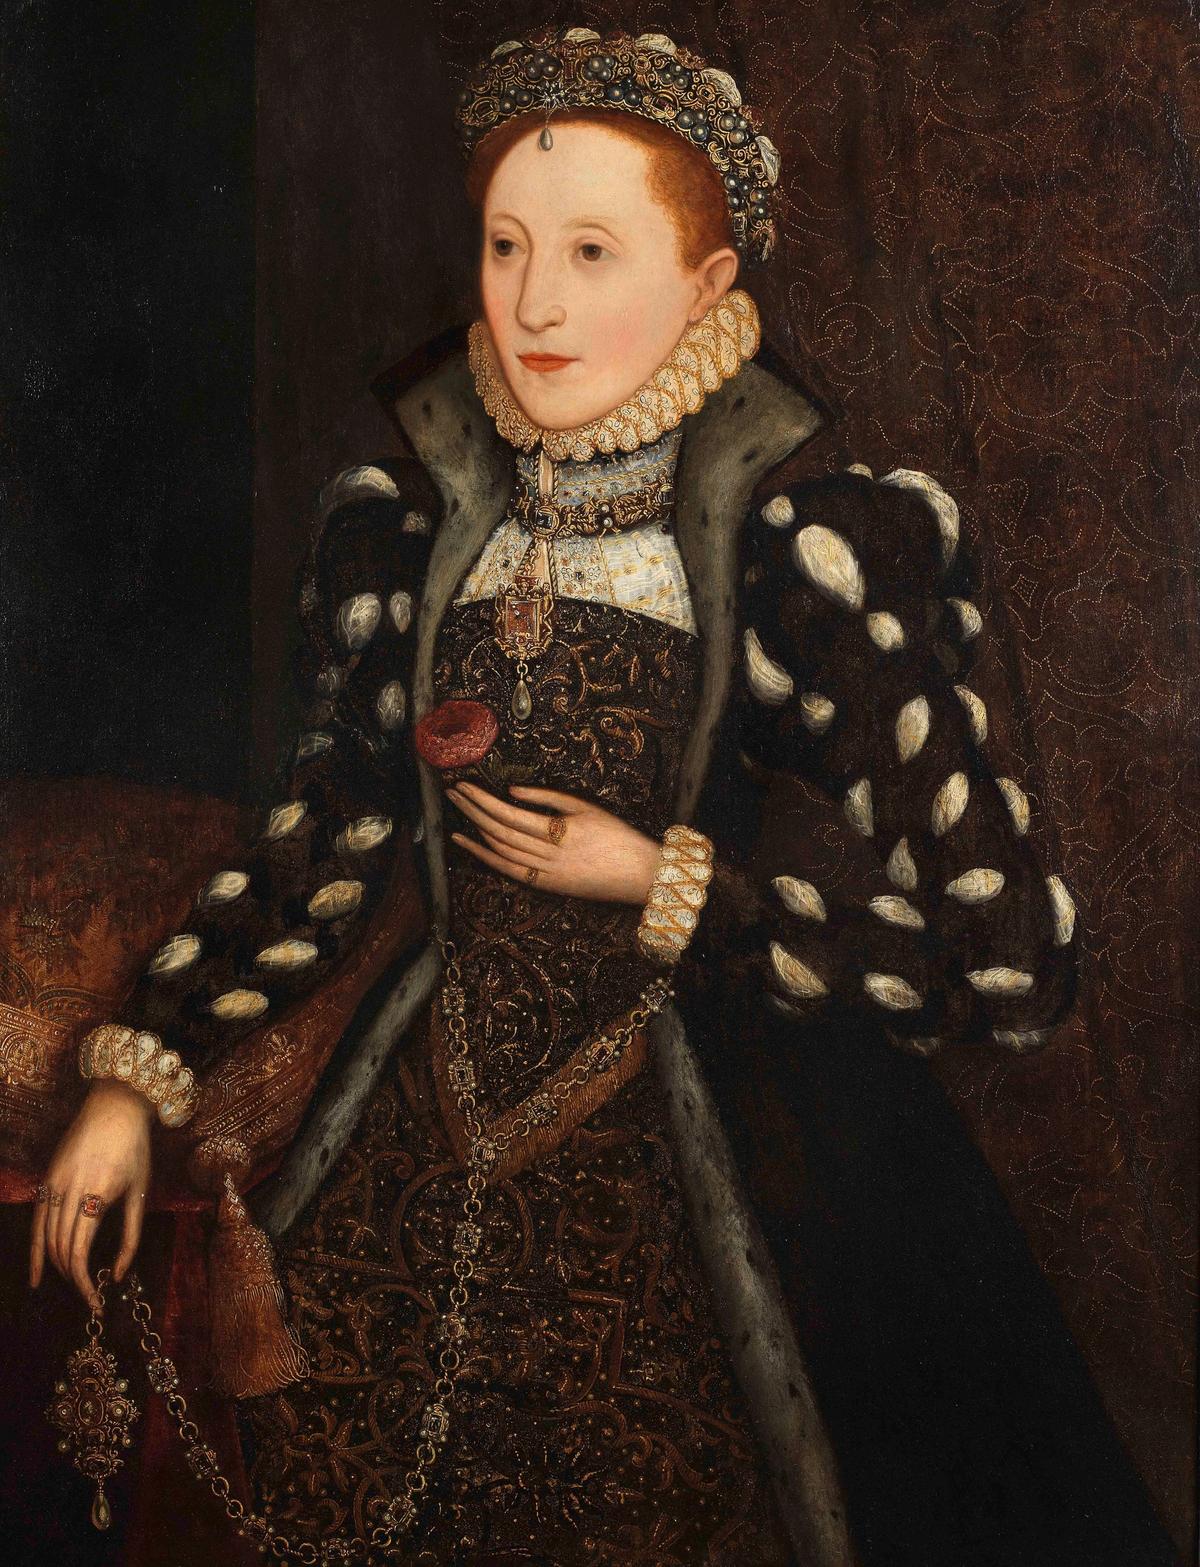 This is thought to be a previously unrecorded portrait of Queen Elizabeth I of England Courtesy of Bonhams